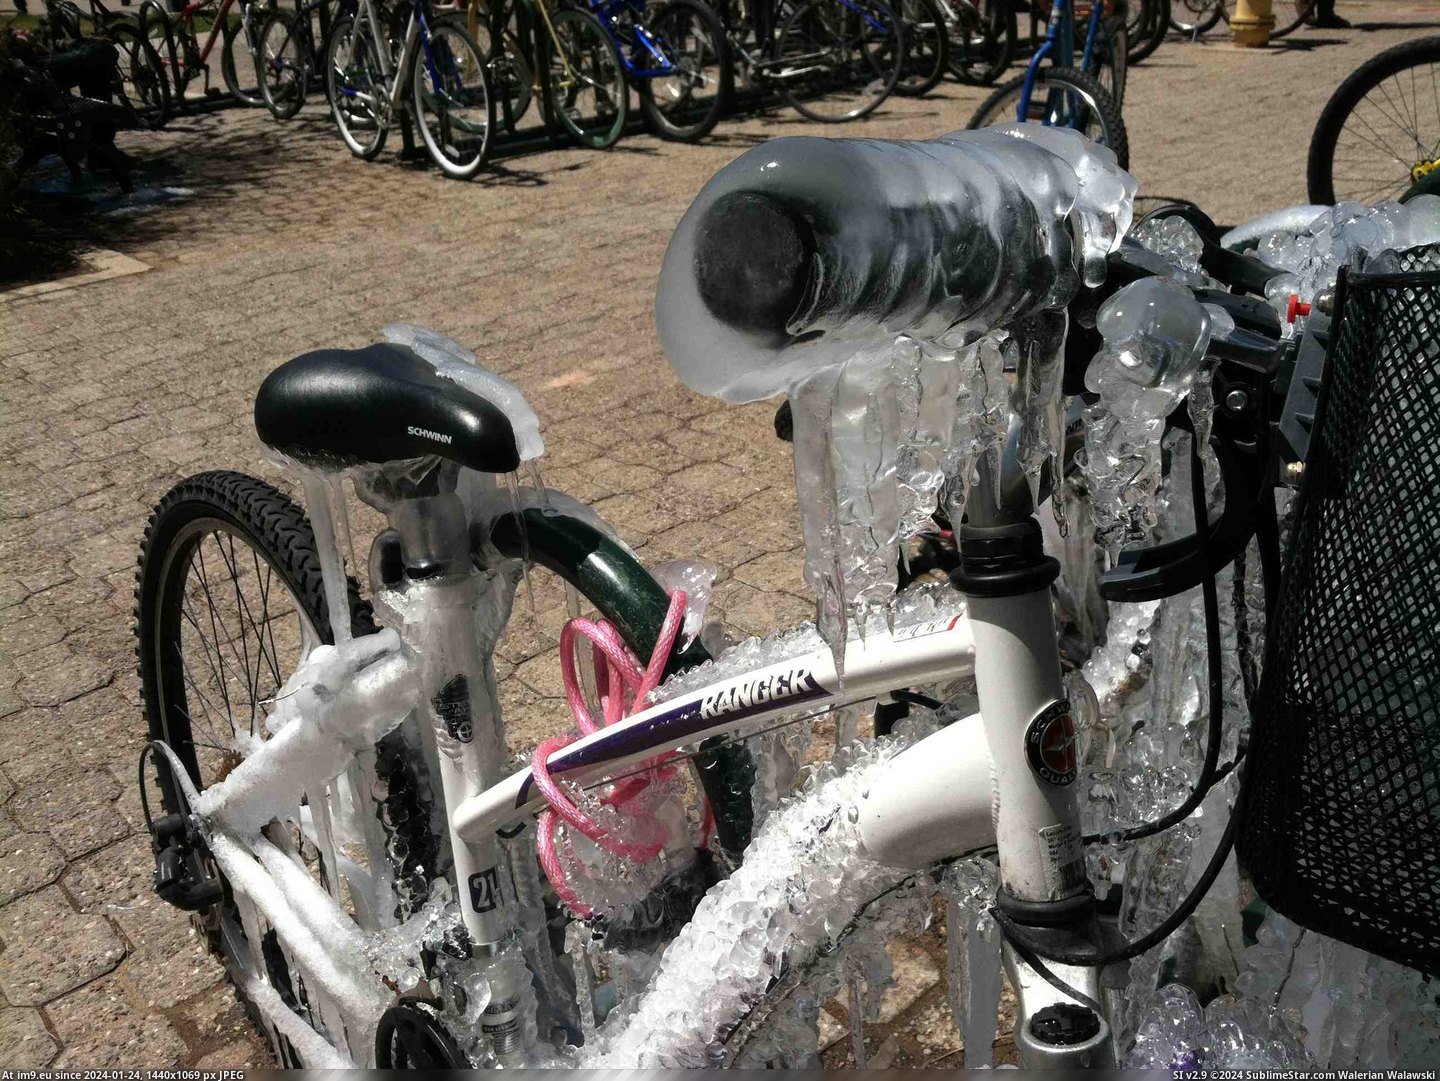 #Wtf #Bike #Temperatures #Sprinklers #Rack #Freezing [Wtf] When sprinklers come on next to the bike rack in freezing temperatures... Pic. (Obraz z album My r/WTF favs))